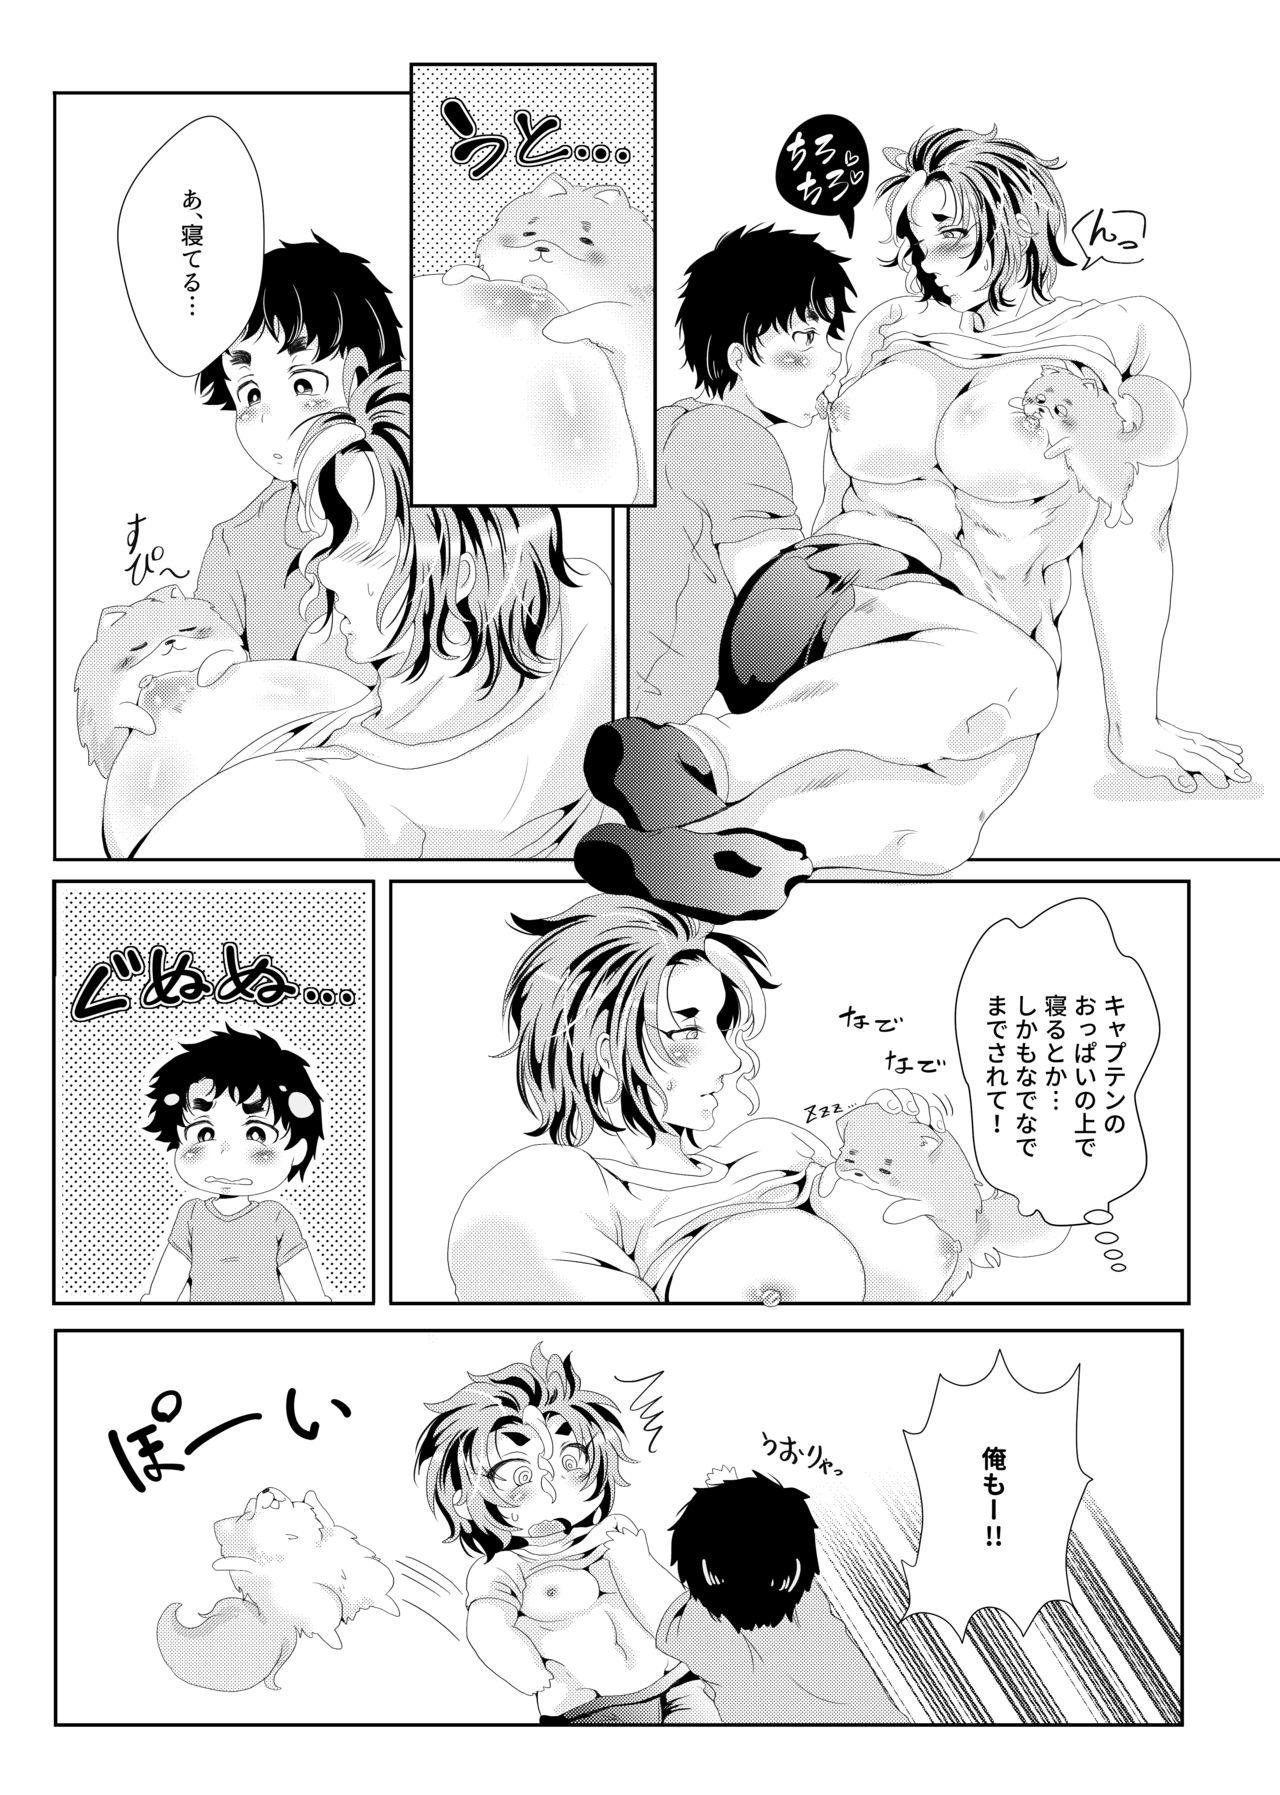 Romance Captain no Bonyuu de One Chance o Nerau - Aiming at One Chance with Captain's Breast Milk - All out Hermosa - Page 11